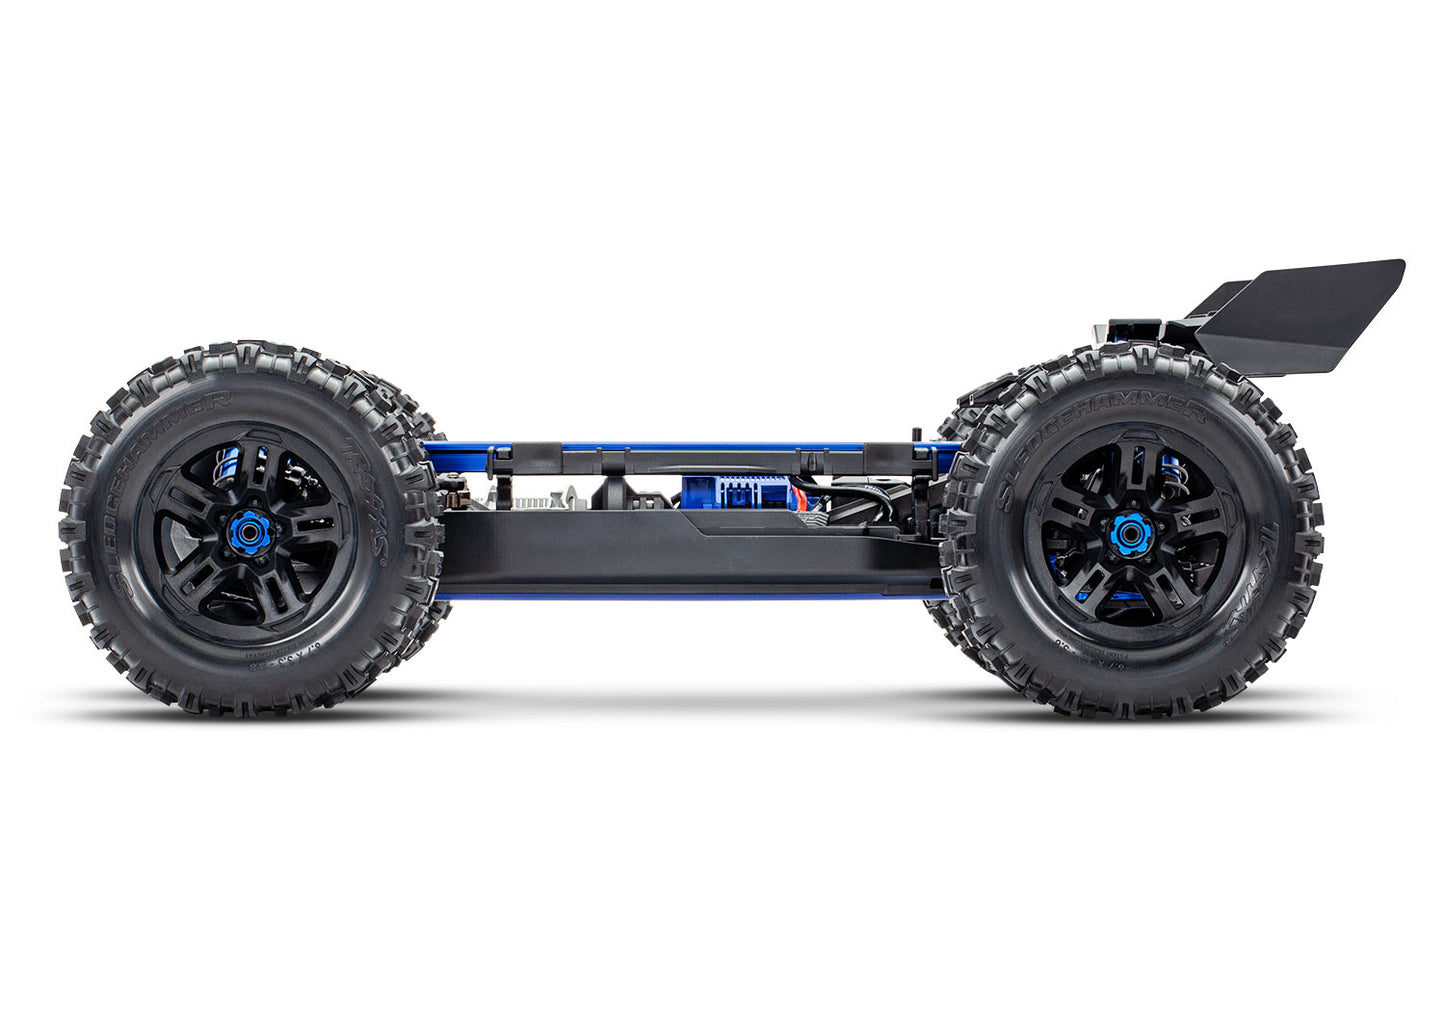 Traxxas Sledge: 1/8 Scale 4WD Brushless Electric Monster Truck with TQi 2.4GHz Traxxas Link Enabled Radio System, Velineon VXL-6s ESC (fwd/rev), and Traxxas Stability Management (TSM) - Orange